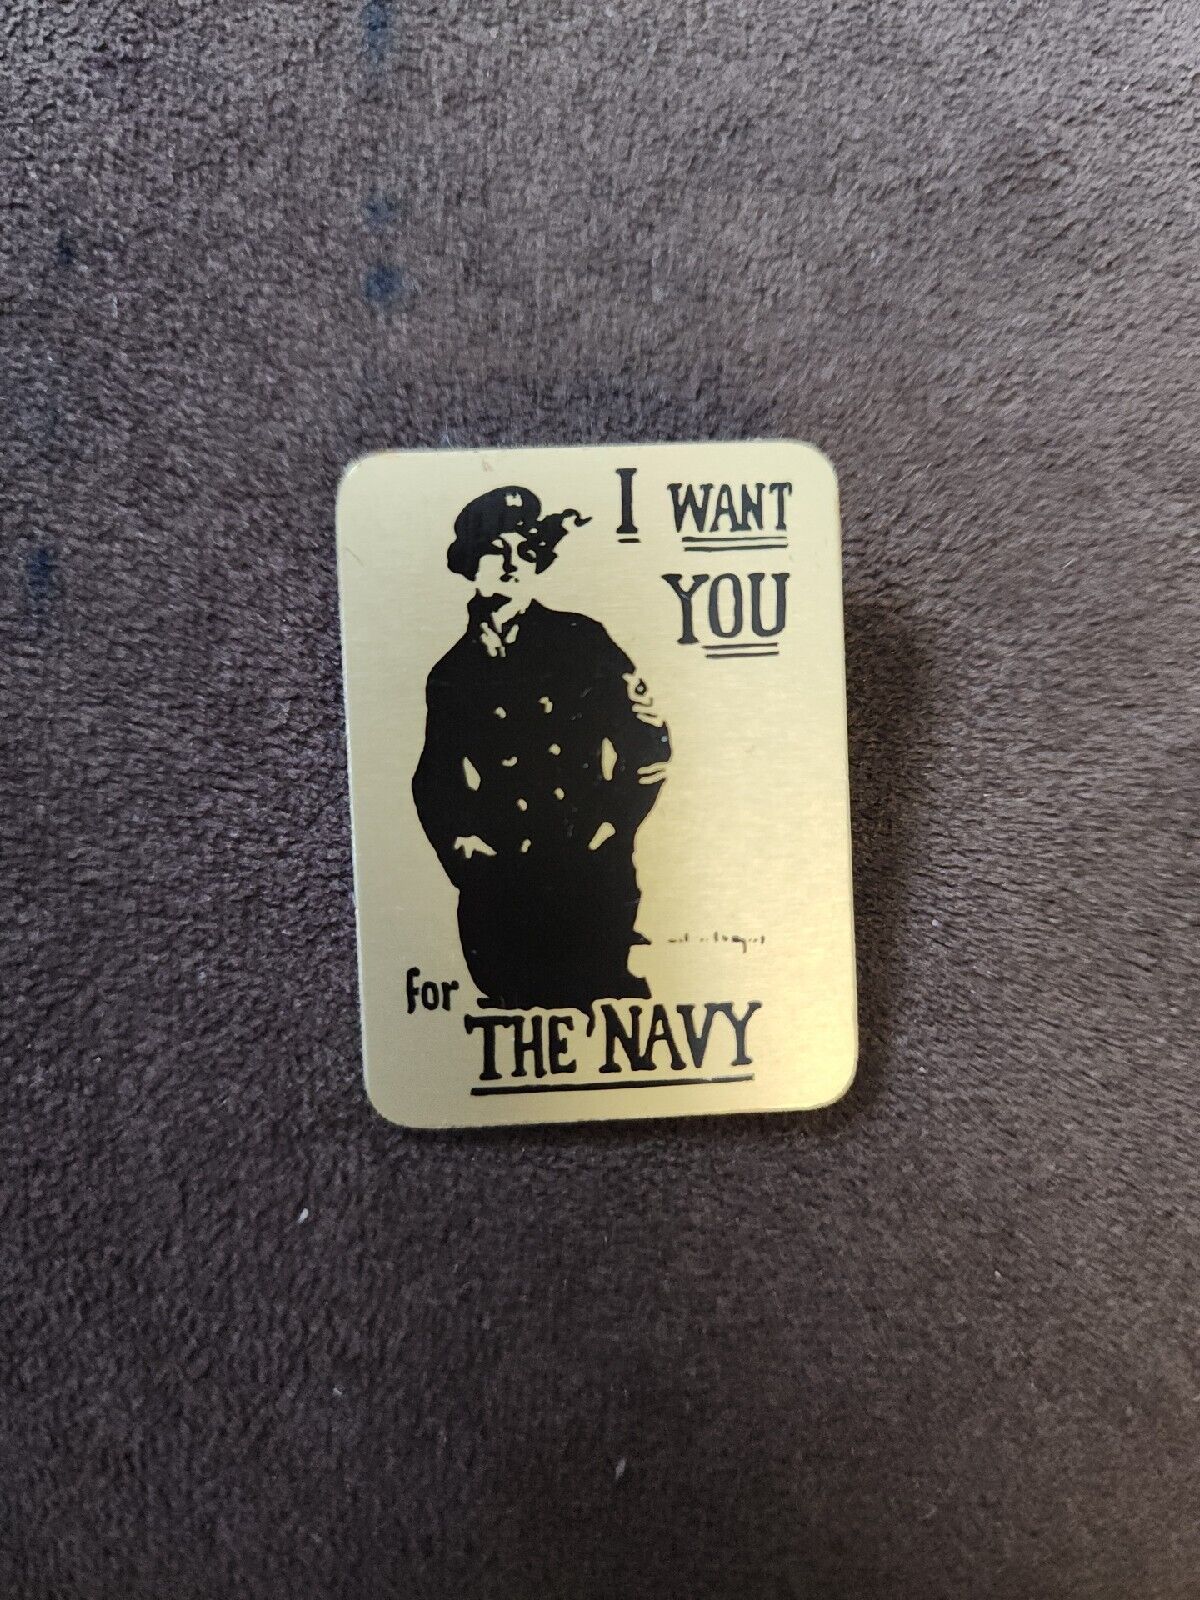 LMH Pin Pinback Tie Lapel Brooch I WANT YOU For The NAVY Poster WWII War Slogan.